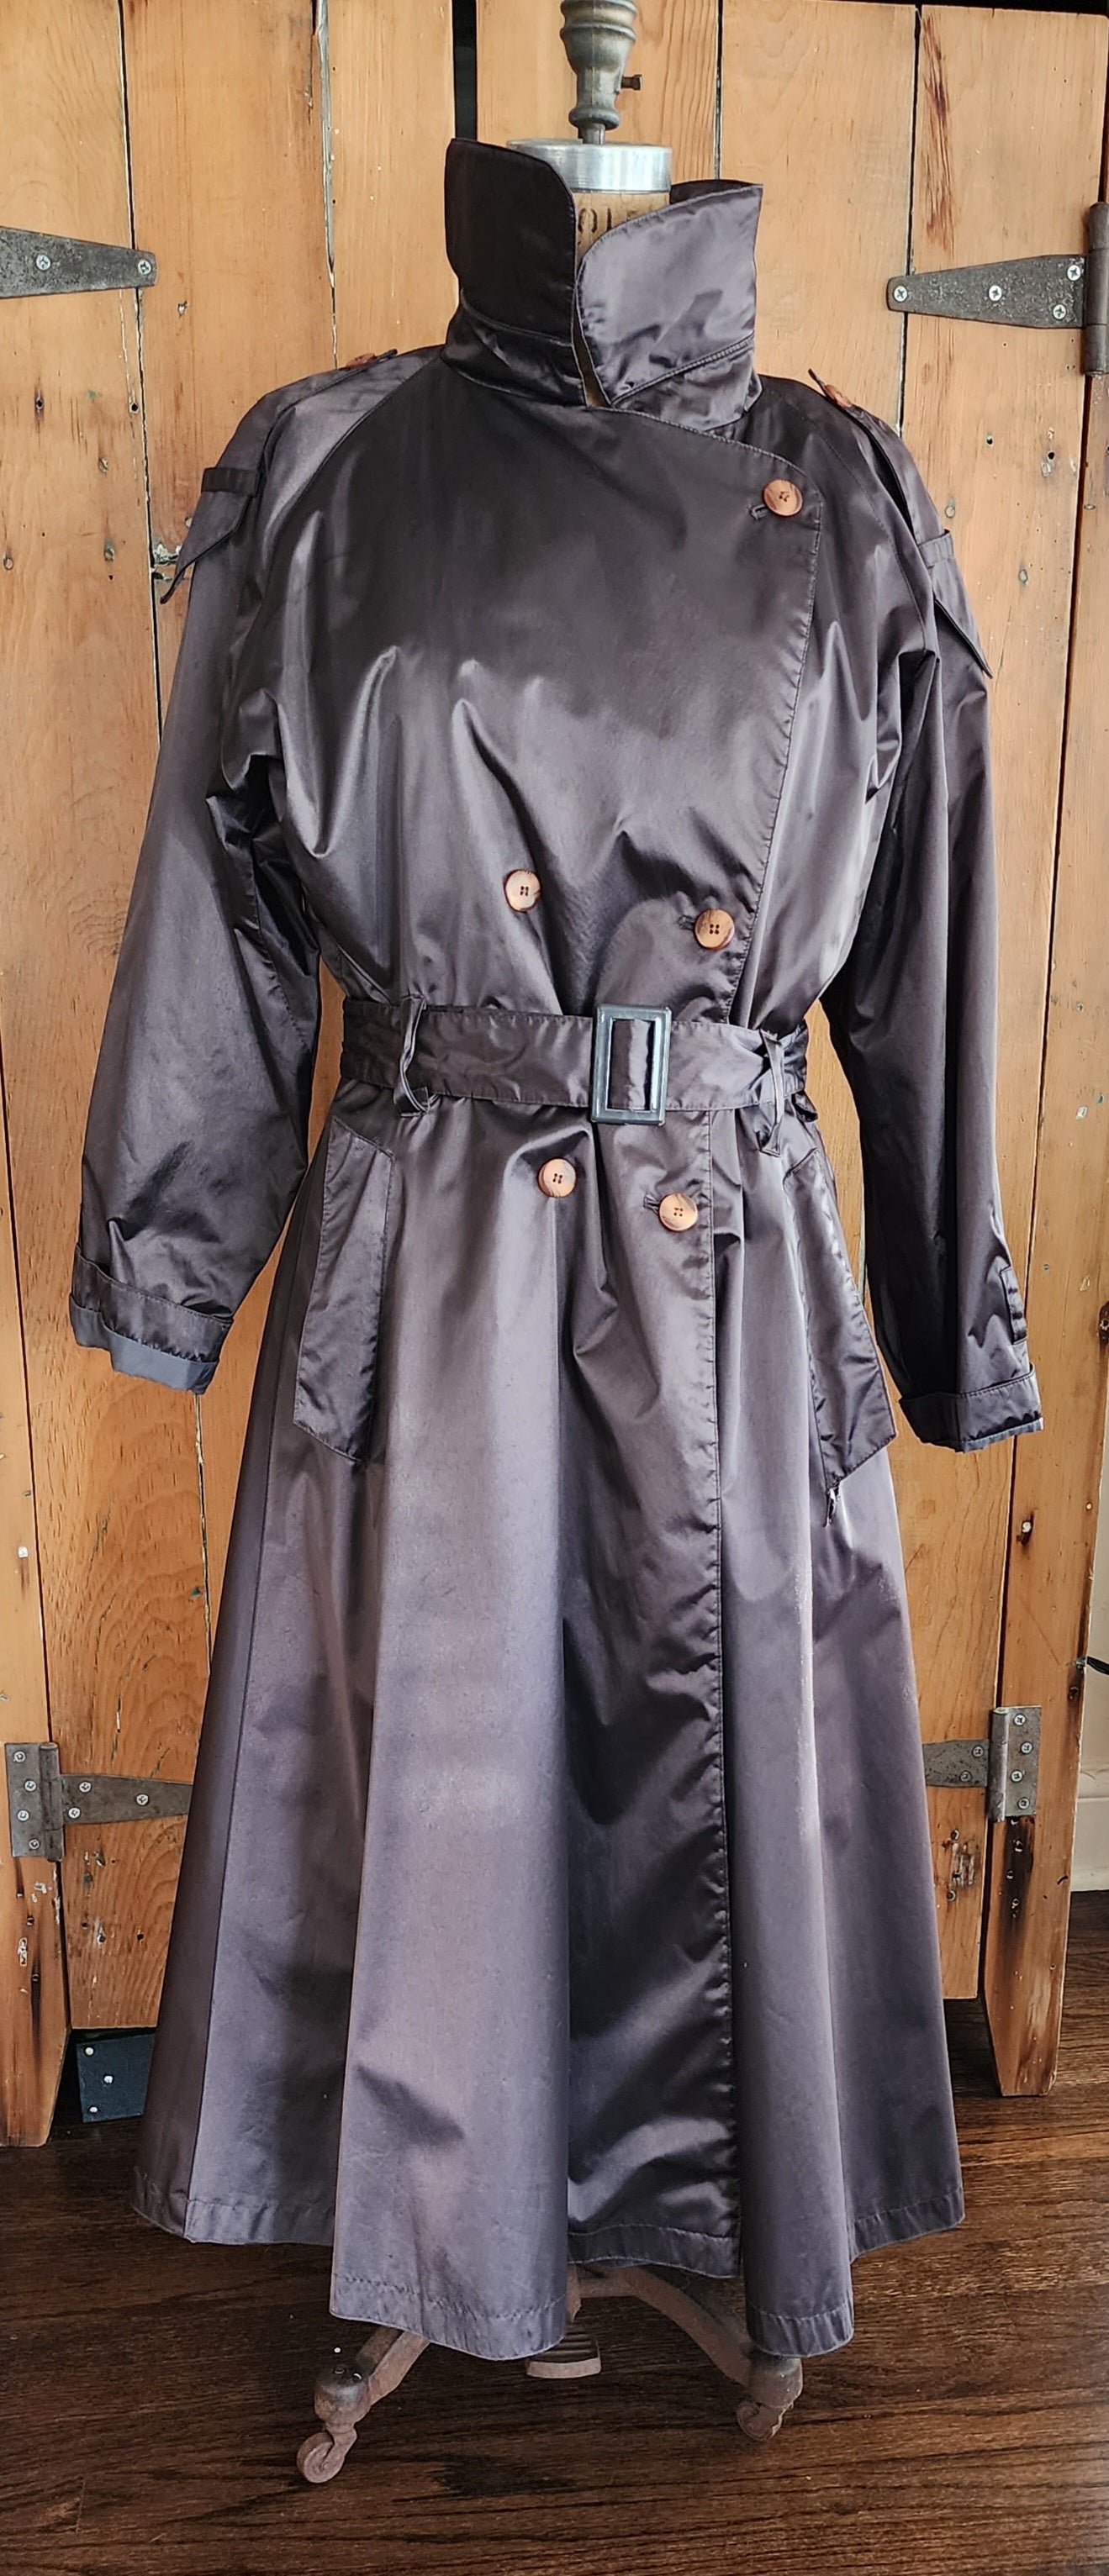 Vintage 80s Trench Coat Metallic Gray by British Mist Large